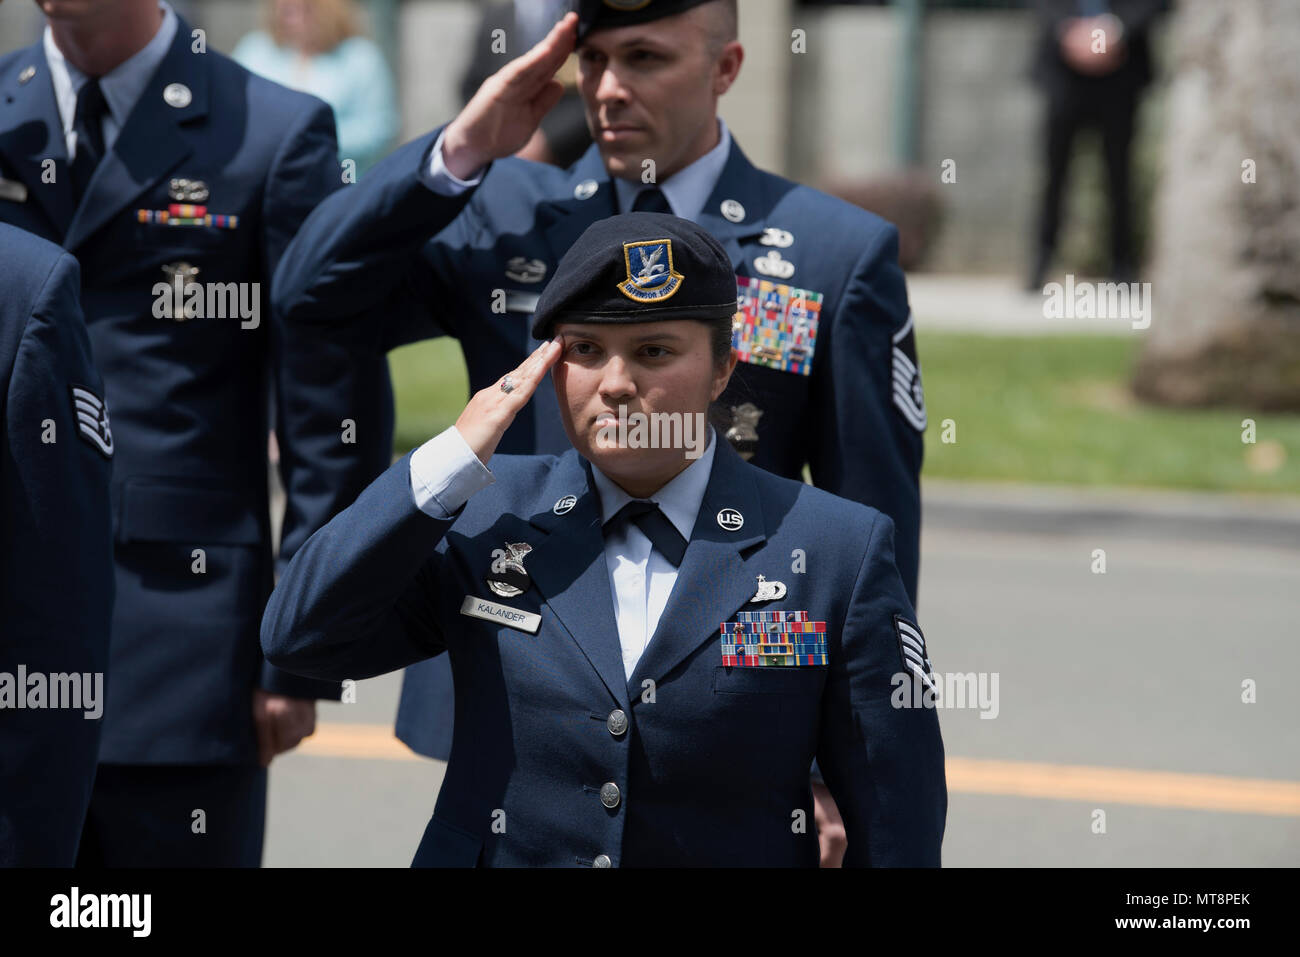 Staff Sgt. Miranda Kalander, 60th Security Forces Squadron military working dog handler, holds a salute during the 29th Annual Peace Officer’s Memorial Ceremony in Fairfield, Calif., May 16, 2018. Nearly a dozen security forces members participated in the ceremony to honor fallen peace officers. (U.S. Air Force photo by Tech. Sgt. James Hodgman) Stock Photo